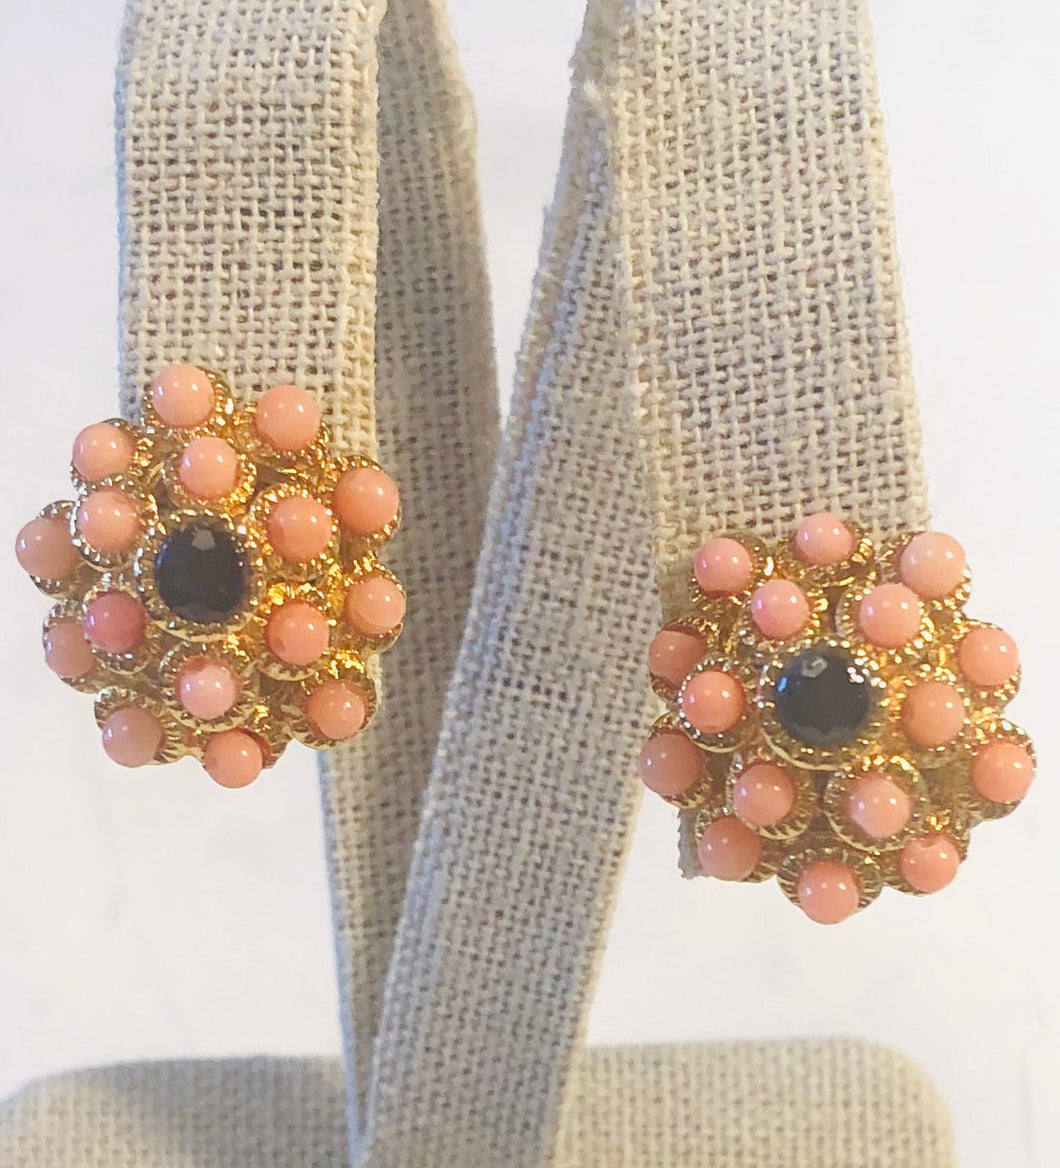 Coral and Genuine Sapphire Earring